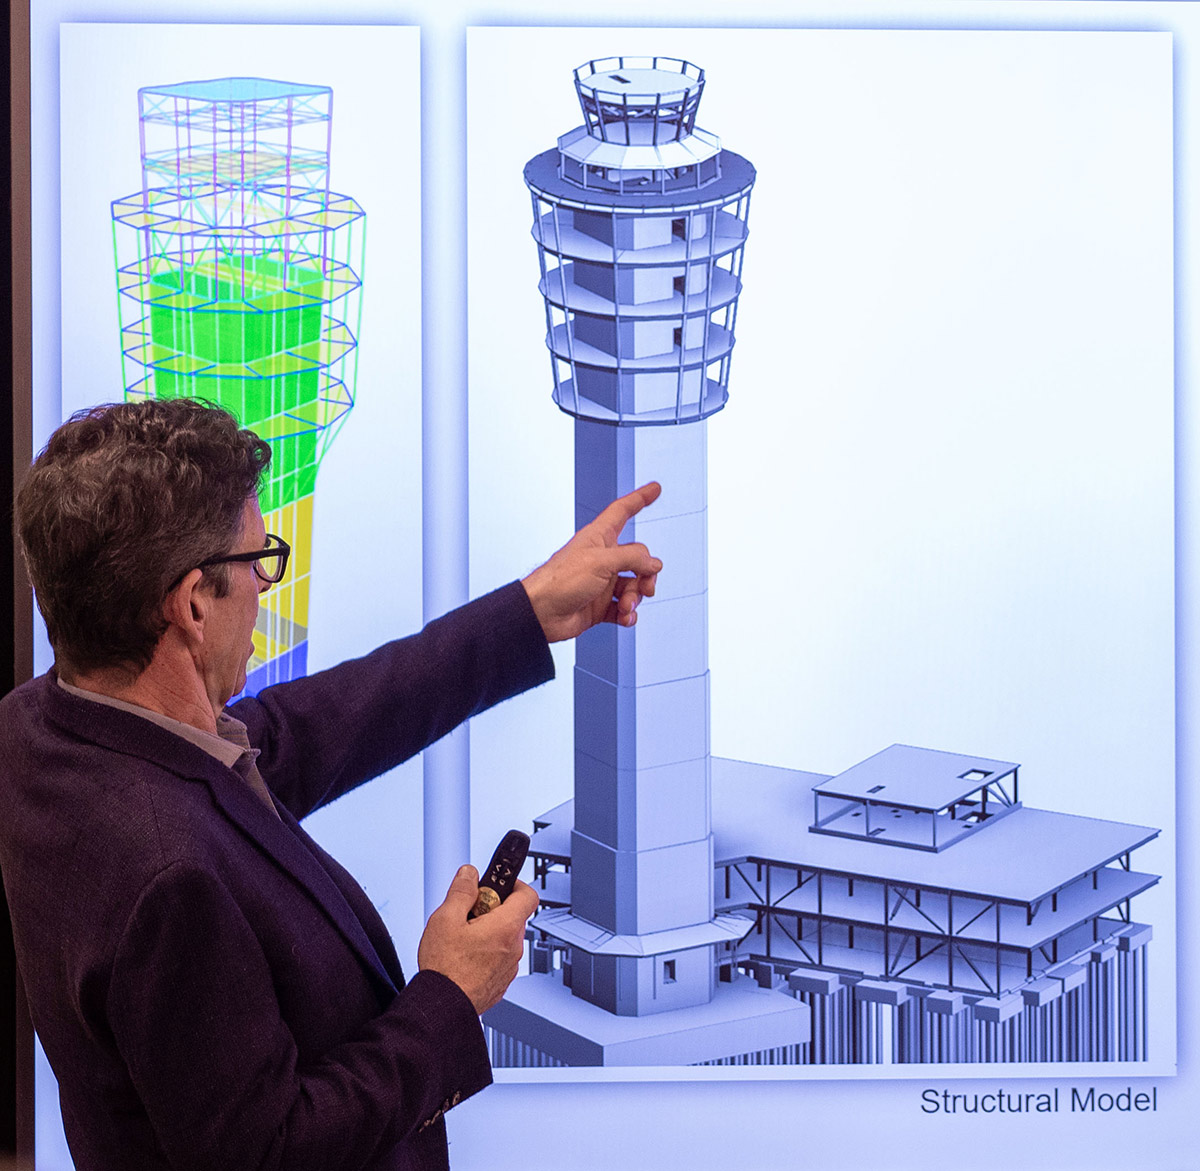 Man pointing to an architectural model on a projector screen